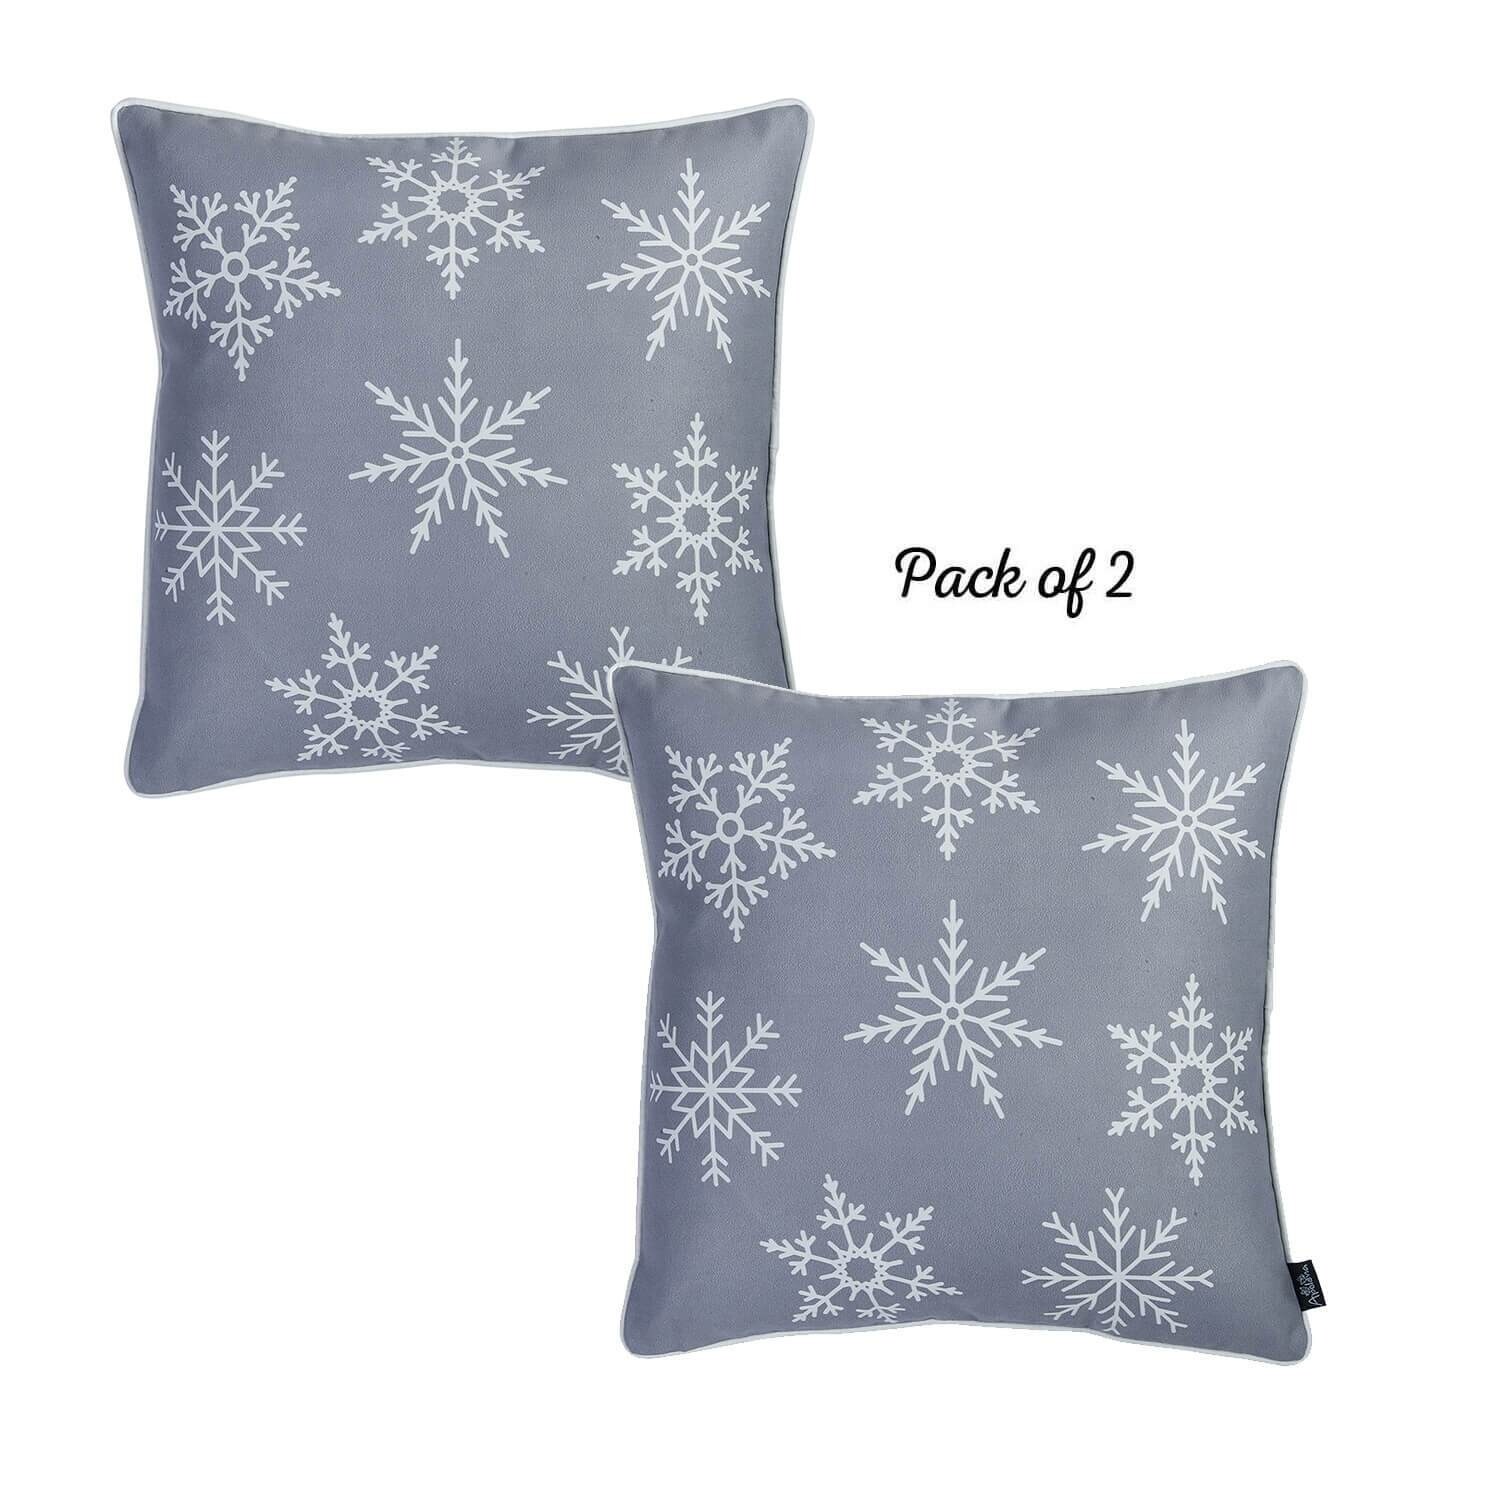 https://ak1.ostkcdn.com/images/products/is/images/direct/460812a2cd795ab8ea9c02ce2f0e943038fb4055/Snowflakes-Throw-Pillow-Cover-18%22x18%22-%282-pcs-in-set%29-Christmas-Gift.jpg